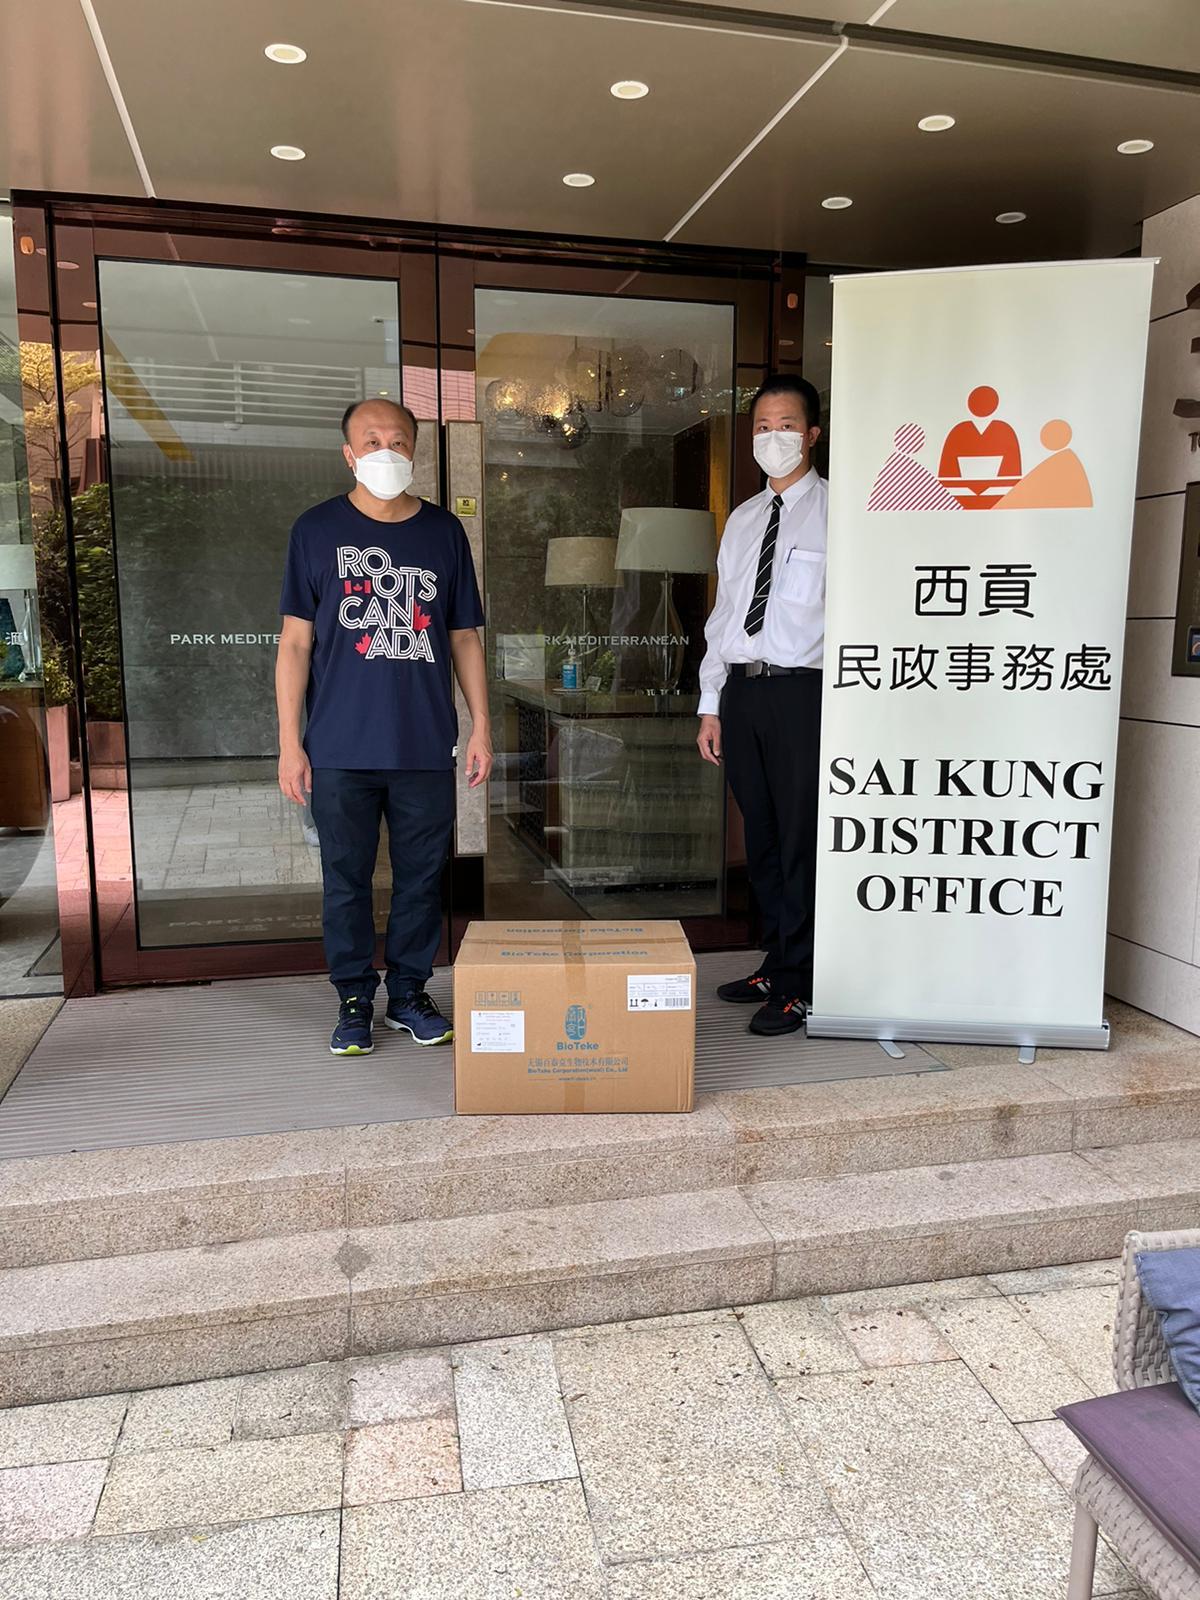 The Sai Kung District Office today (June 20) distributed COVID-19 rapid test kits to households, cleansing workers and property management staff living and working in Park Mediterranean for voluntary testing through the property management company.